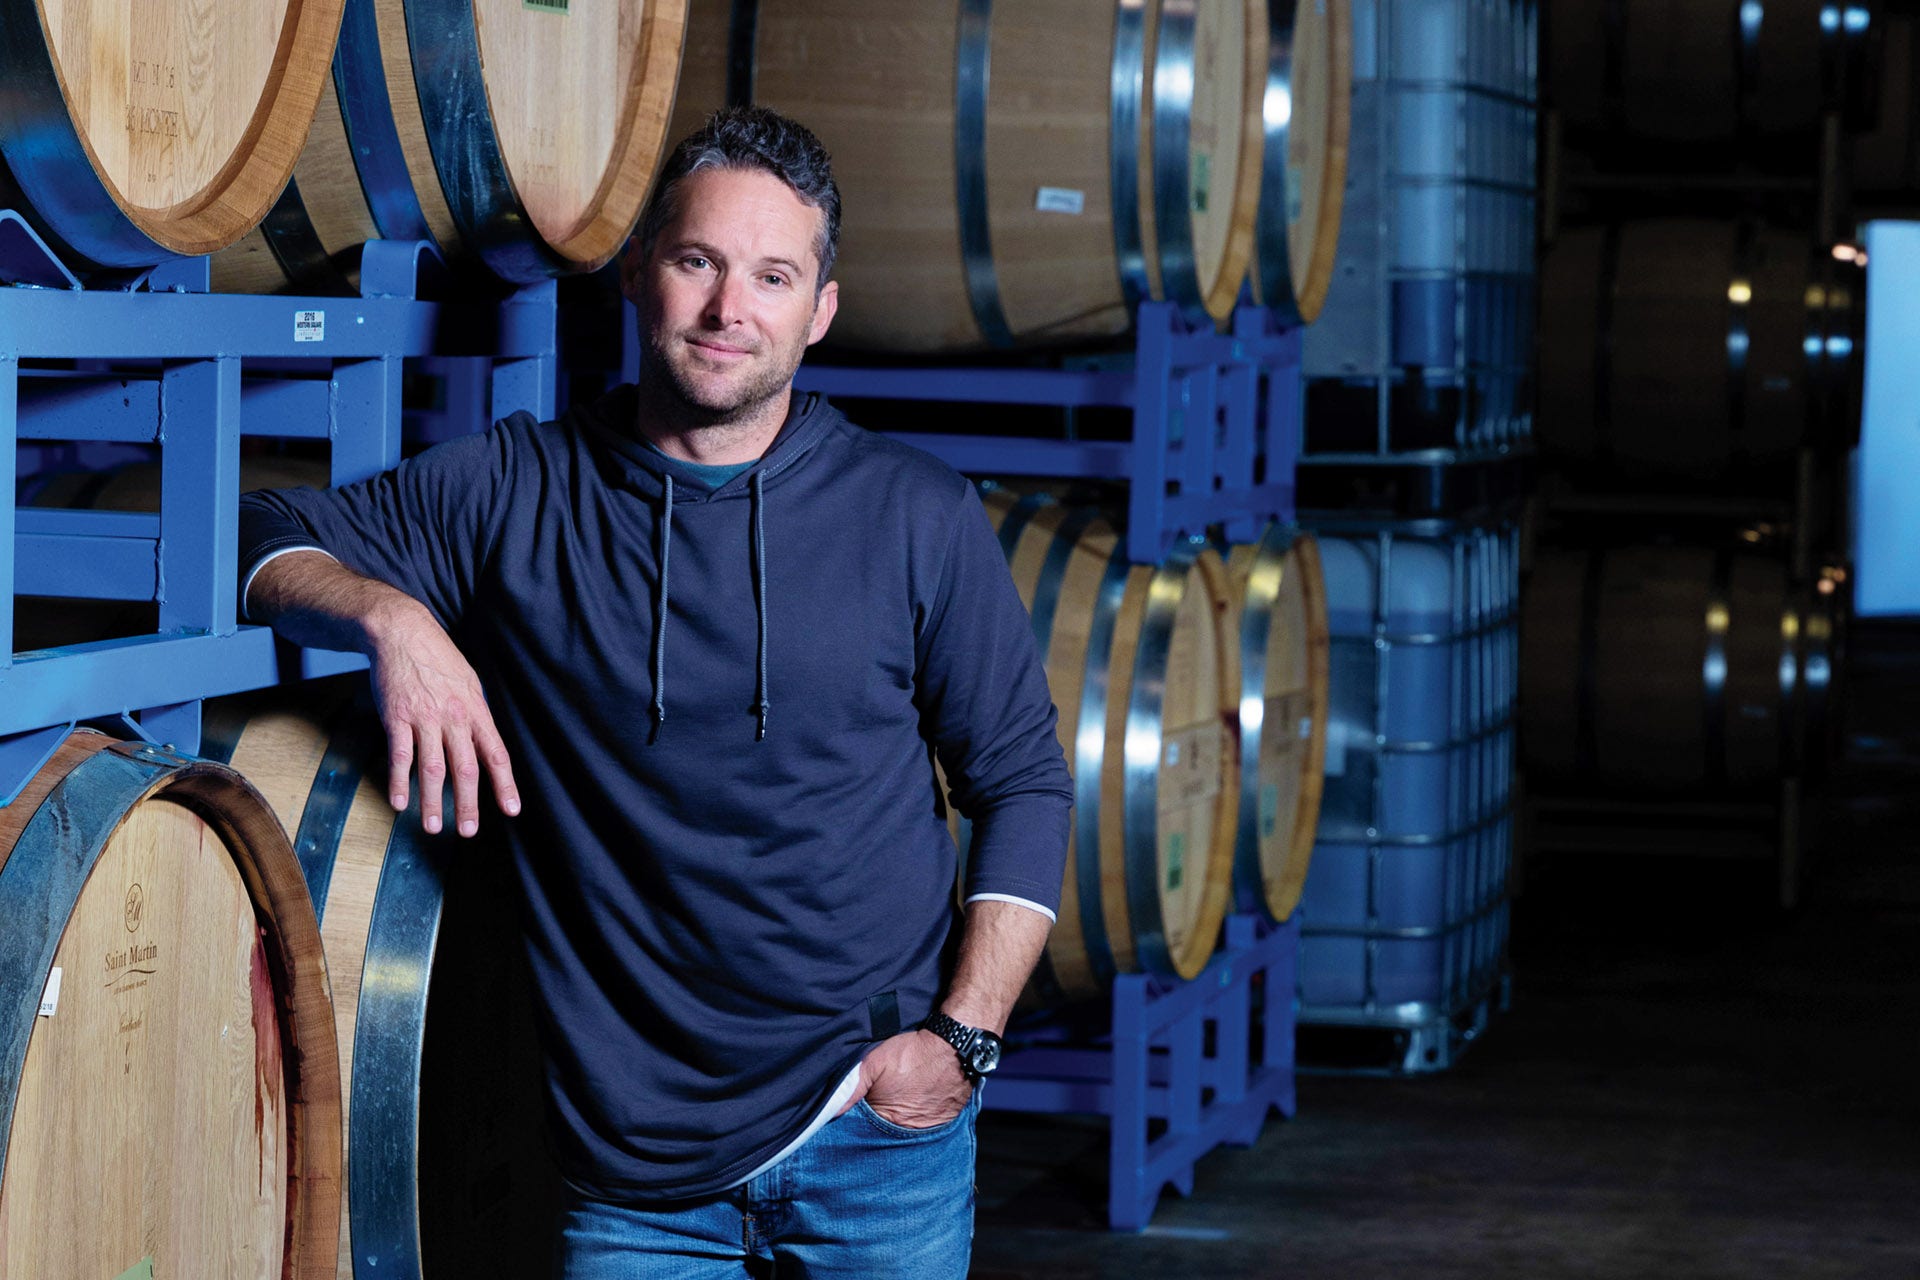 Joe Shebl, director of winemaking and general manager of Renwood Winery